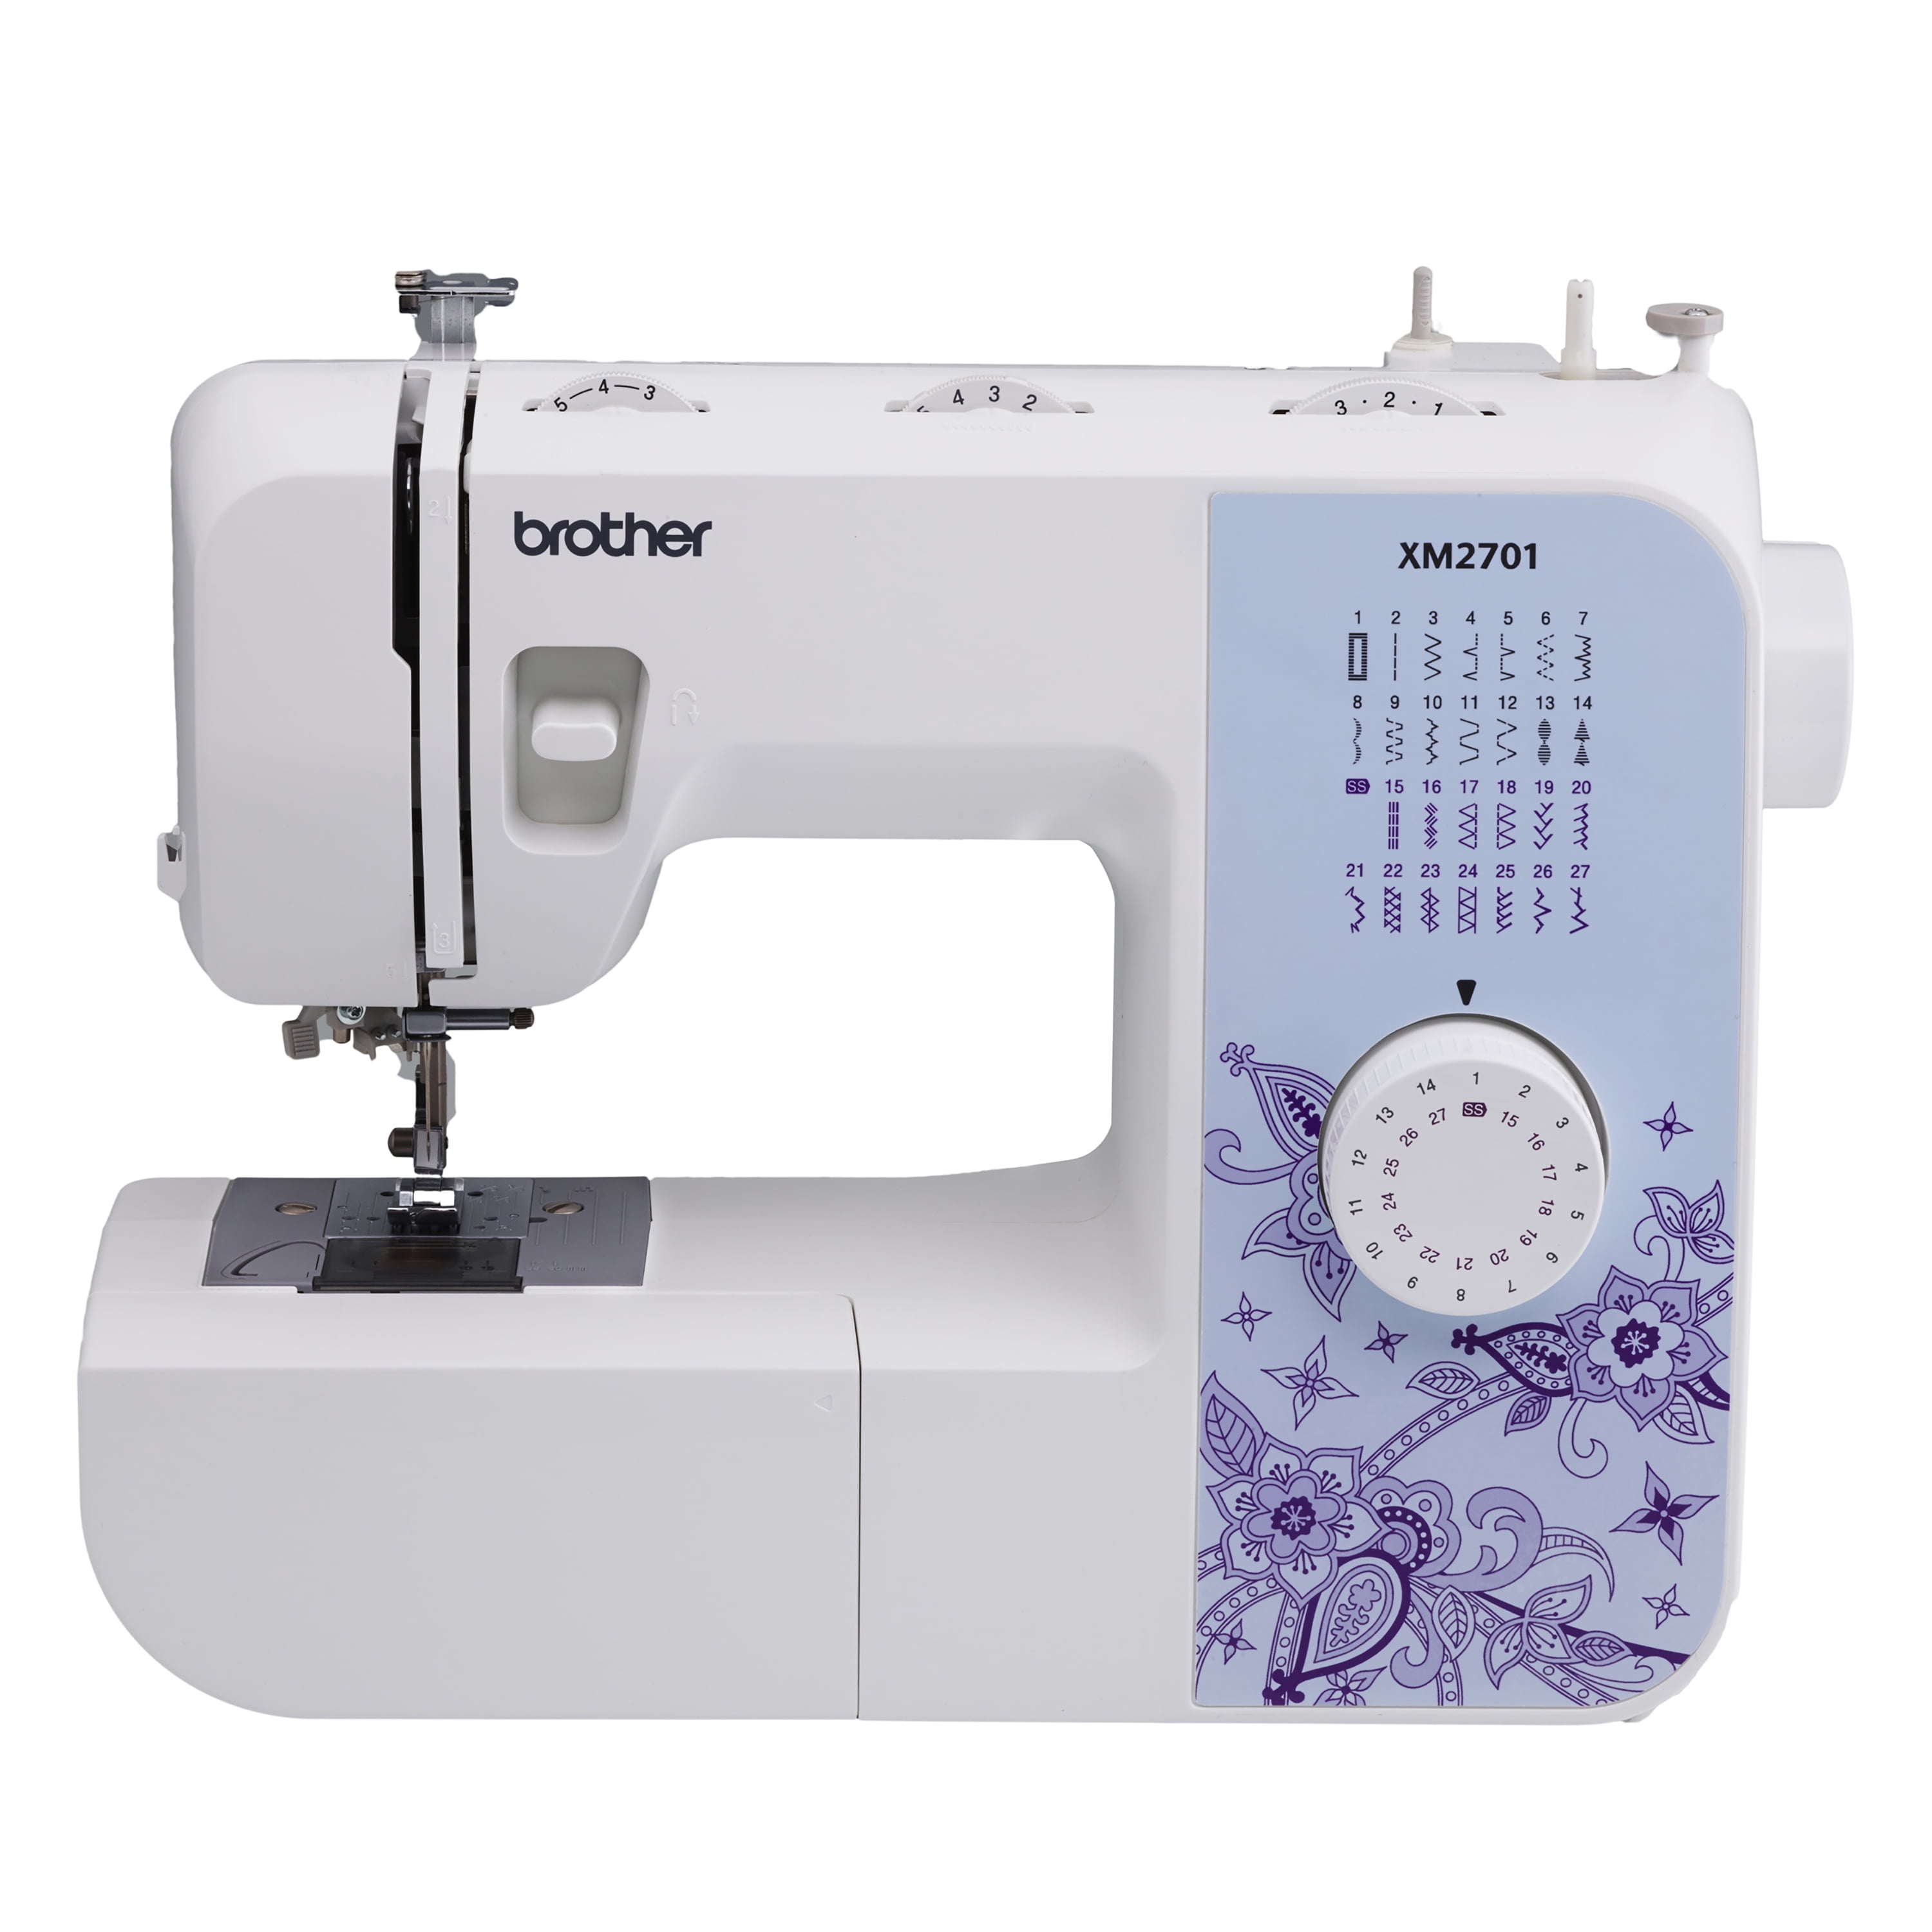 The Best Portable Sewing Machines for 2020 - Sewing Machine Reviews